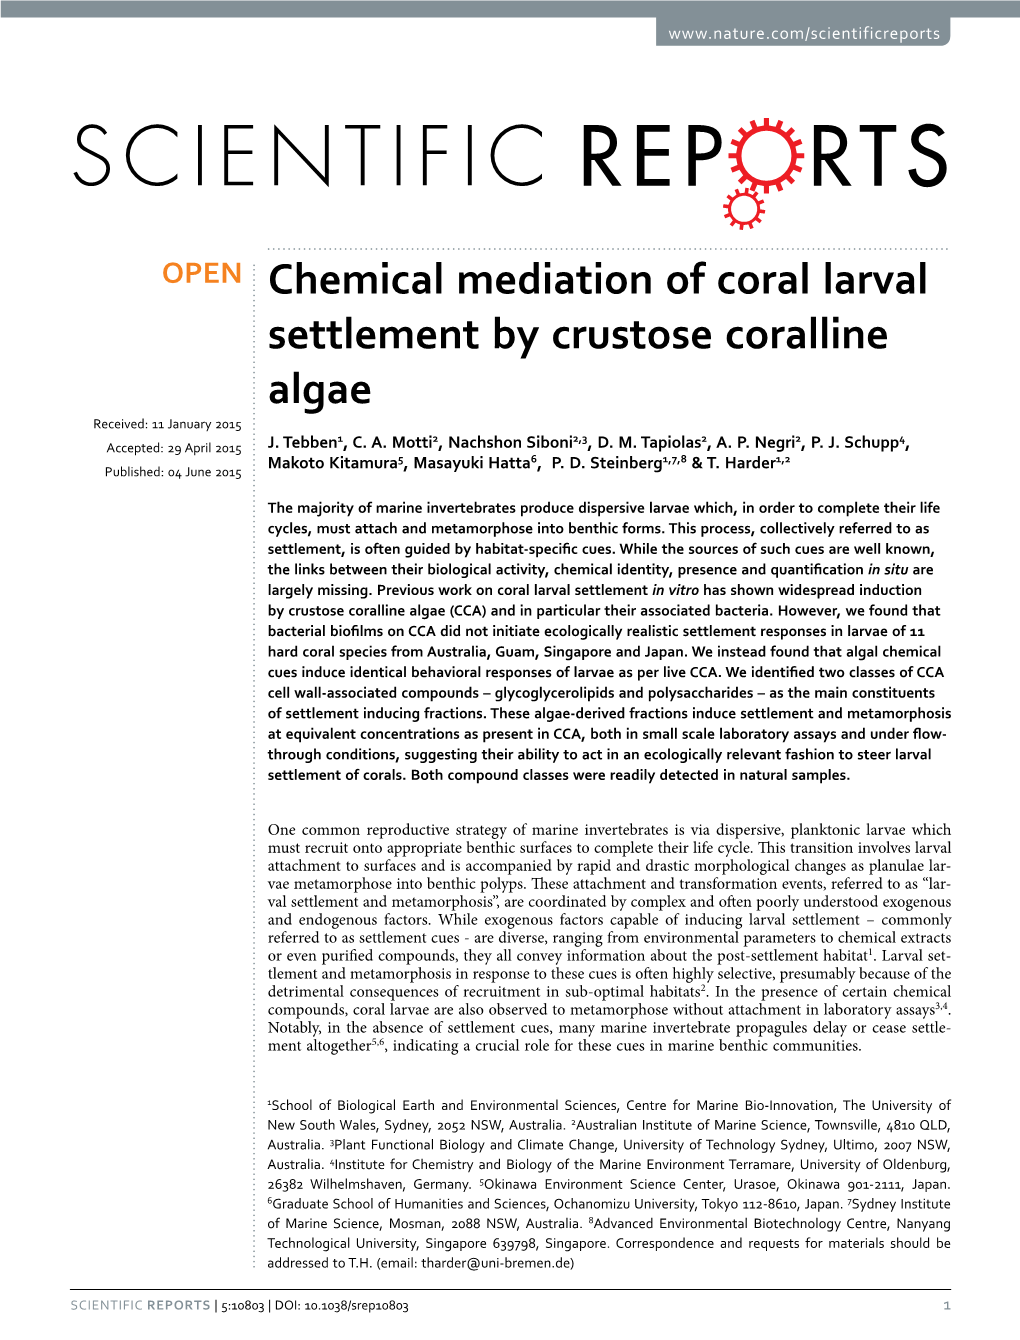 Chemical Mediation of Coral Larval Settlement by Crustose Coralline Algae Received: 11 January 2015 1 2 2,3 2 2 4 Accepted: 29 April 2015 J